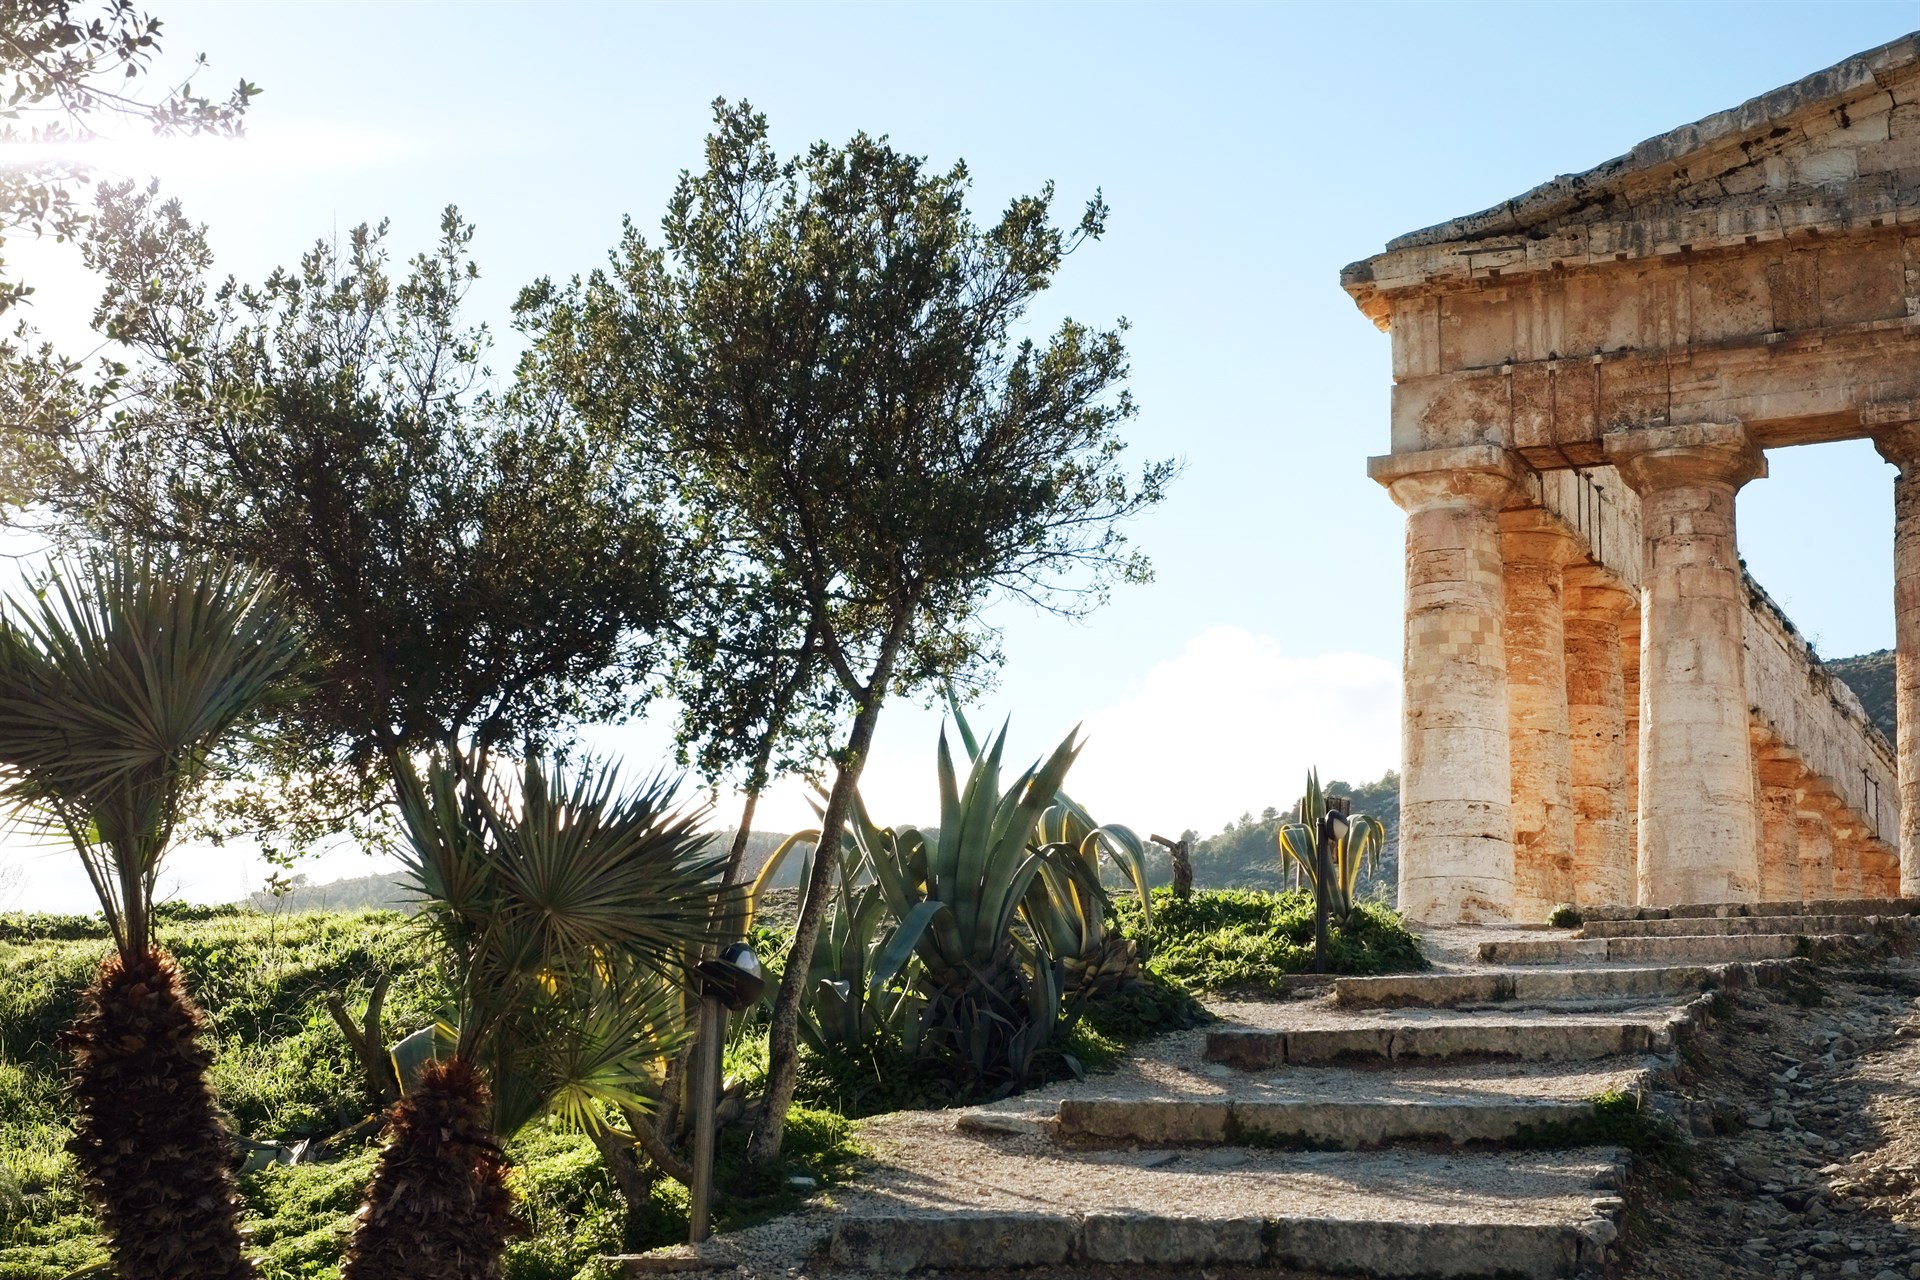 Must-see archaeological sites in Sicily